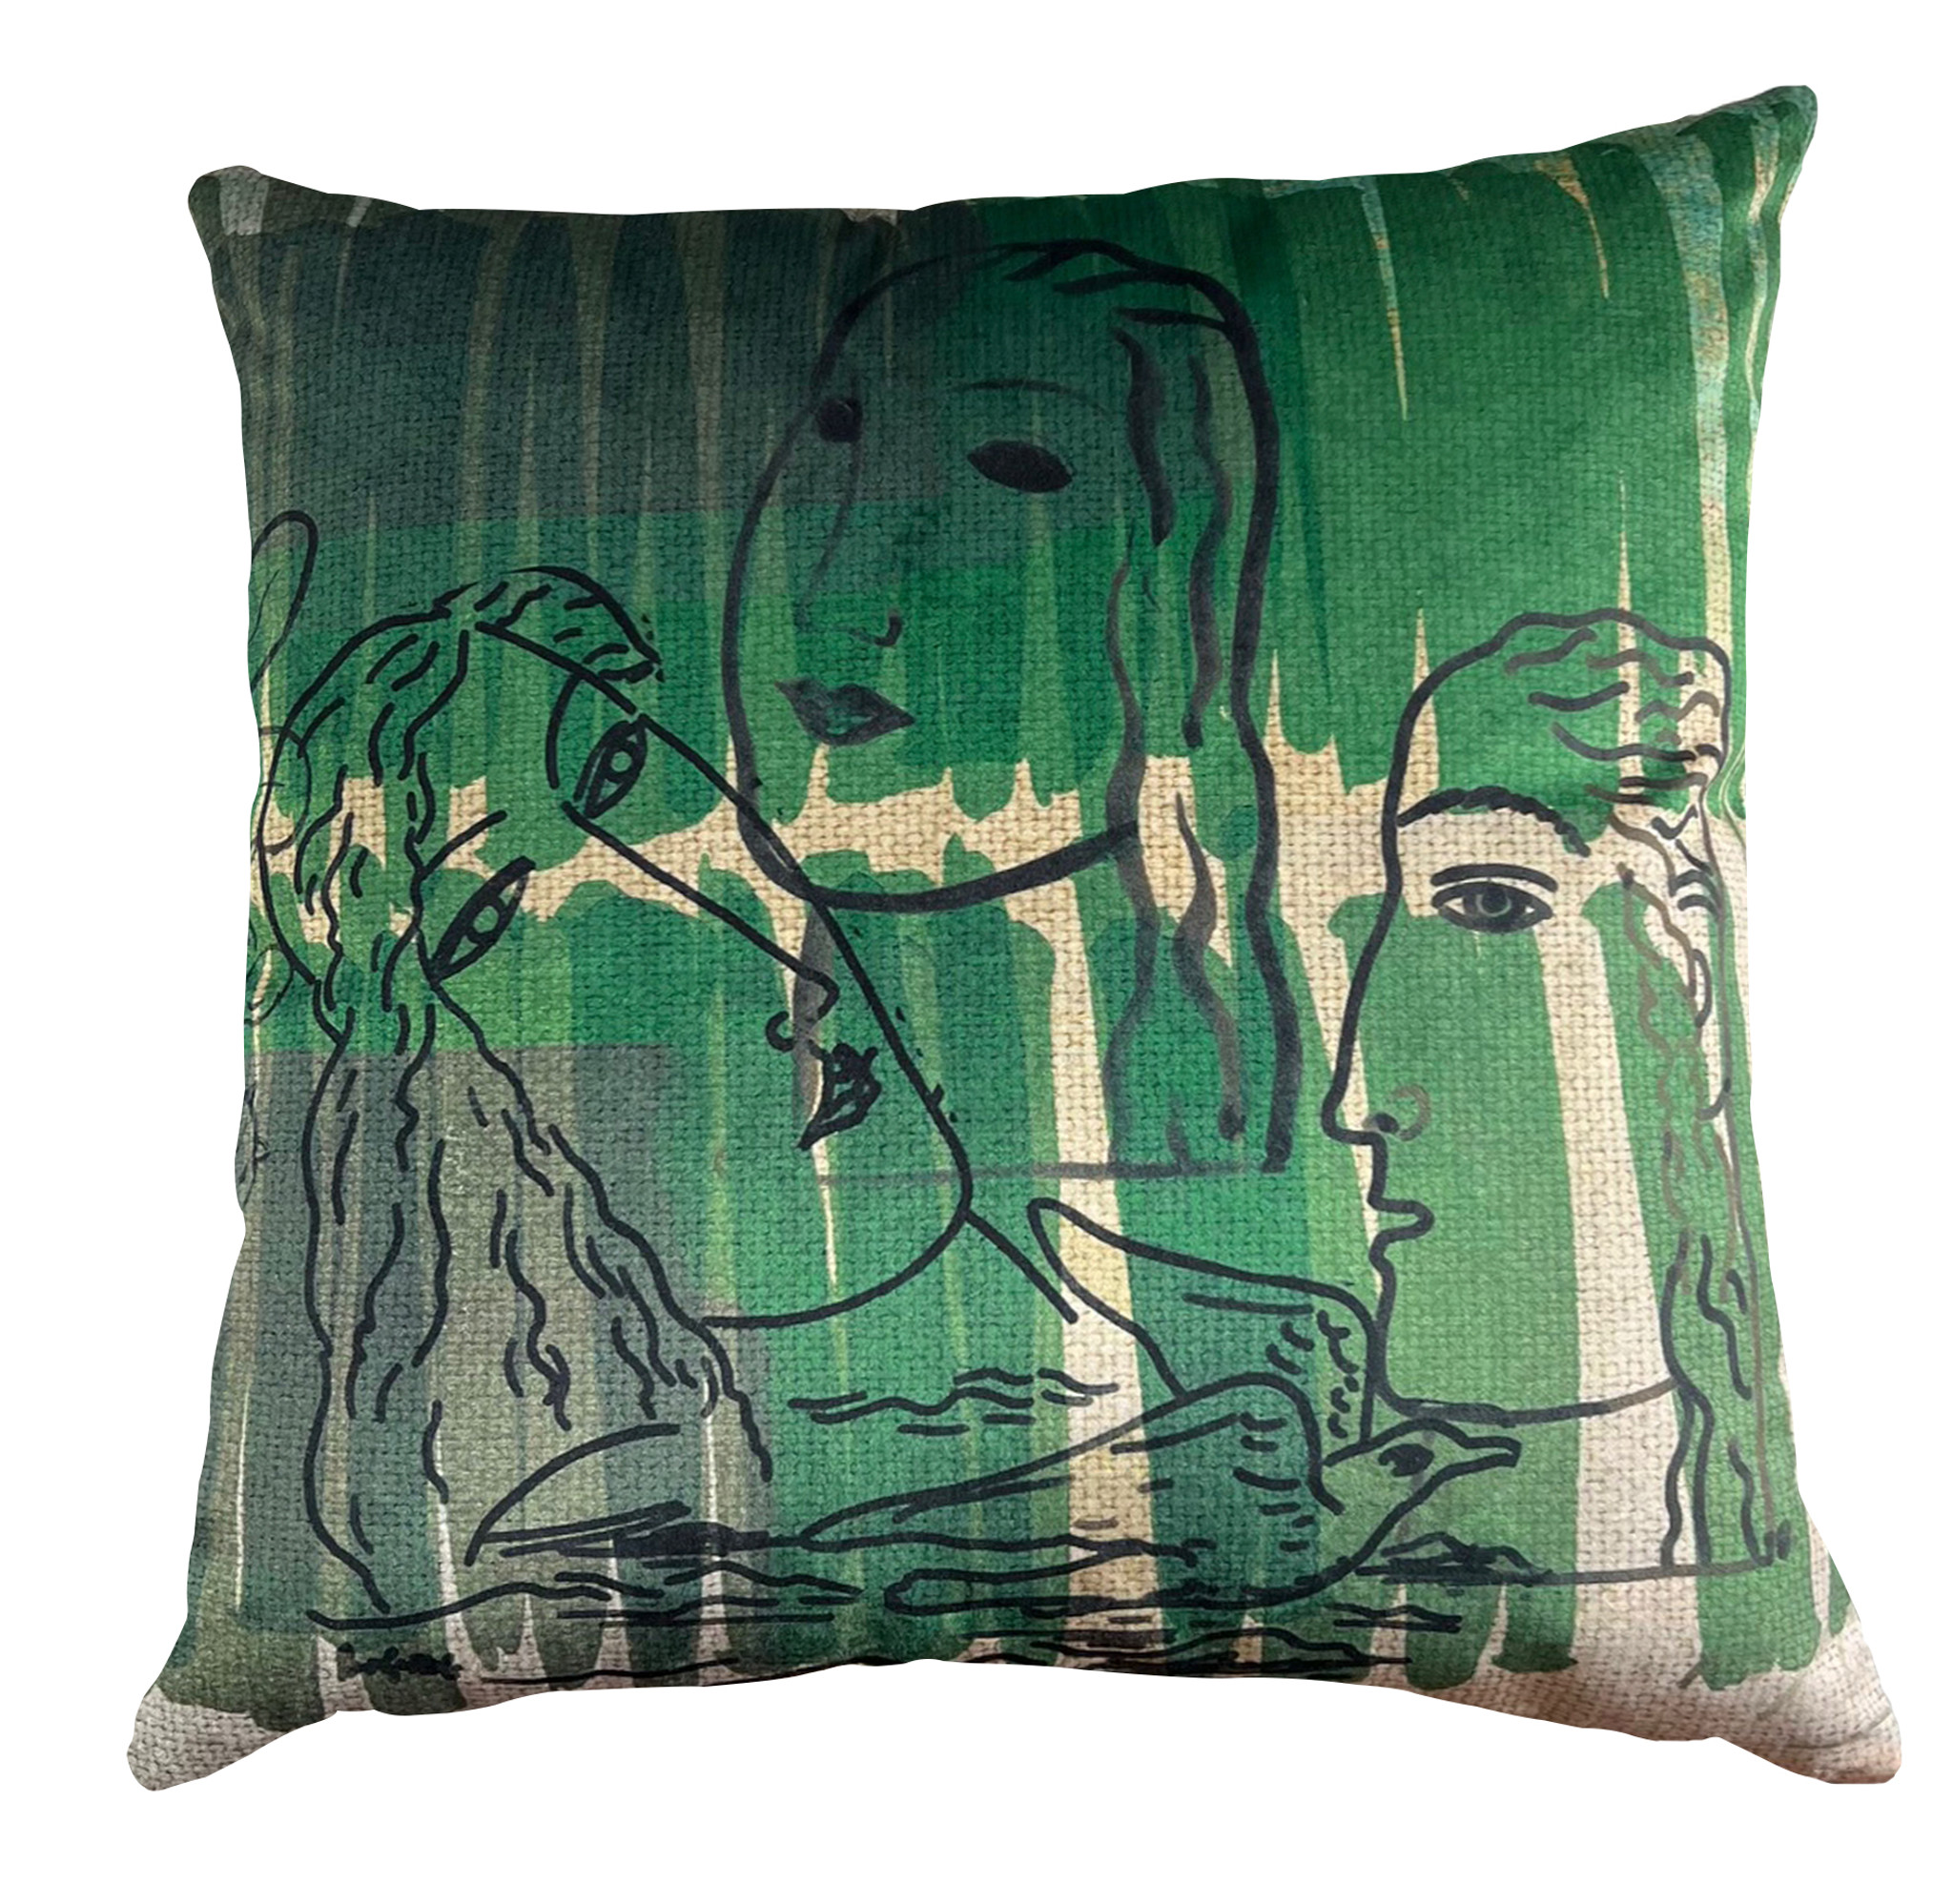 Cushion Cover - Composition with Bird